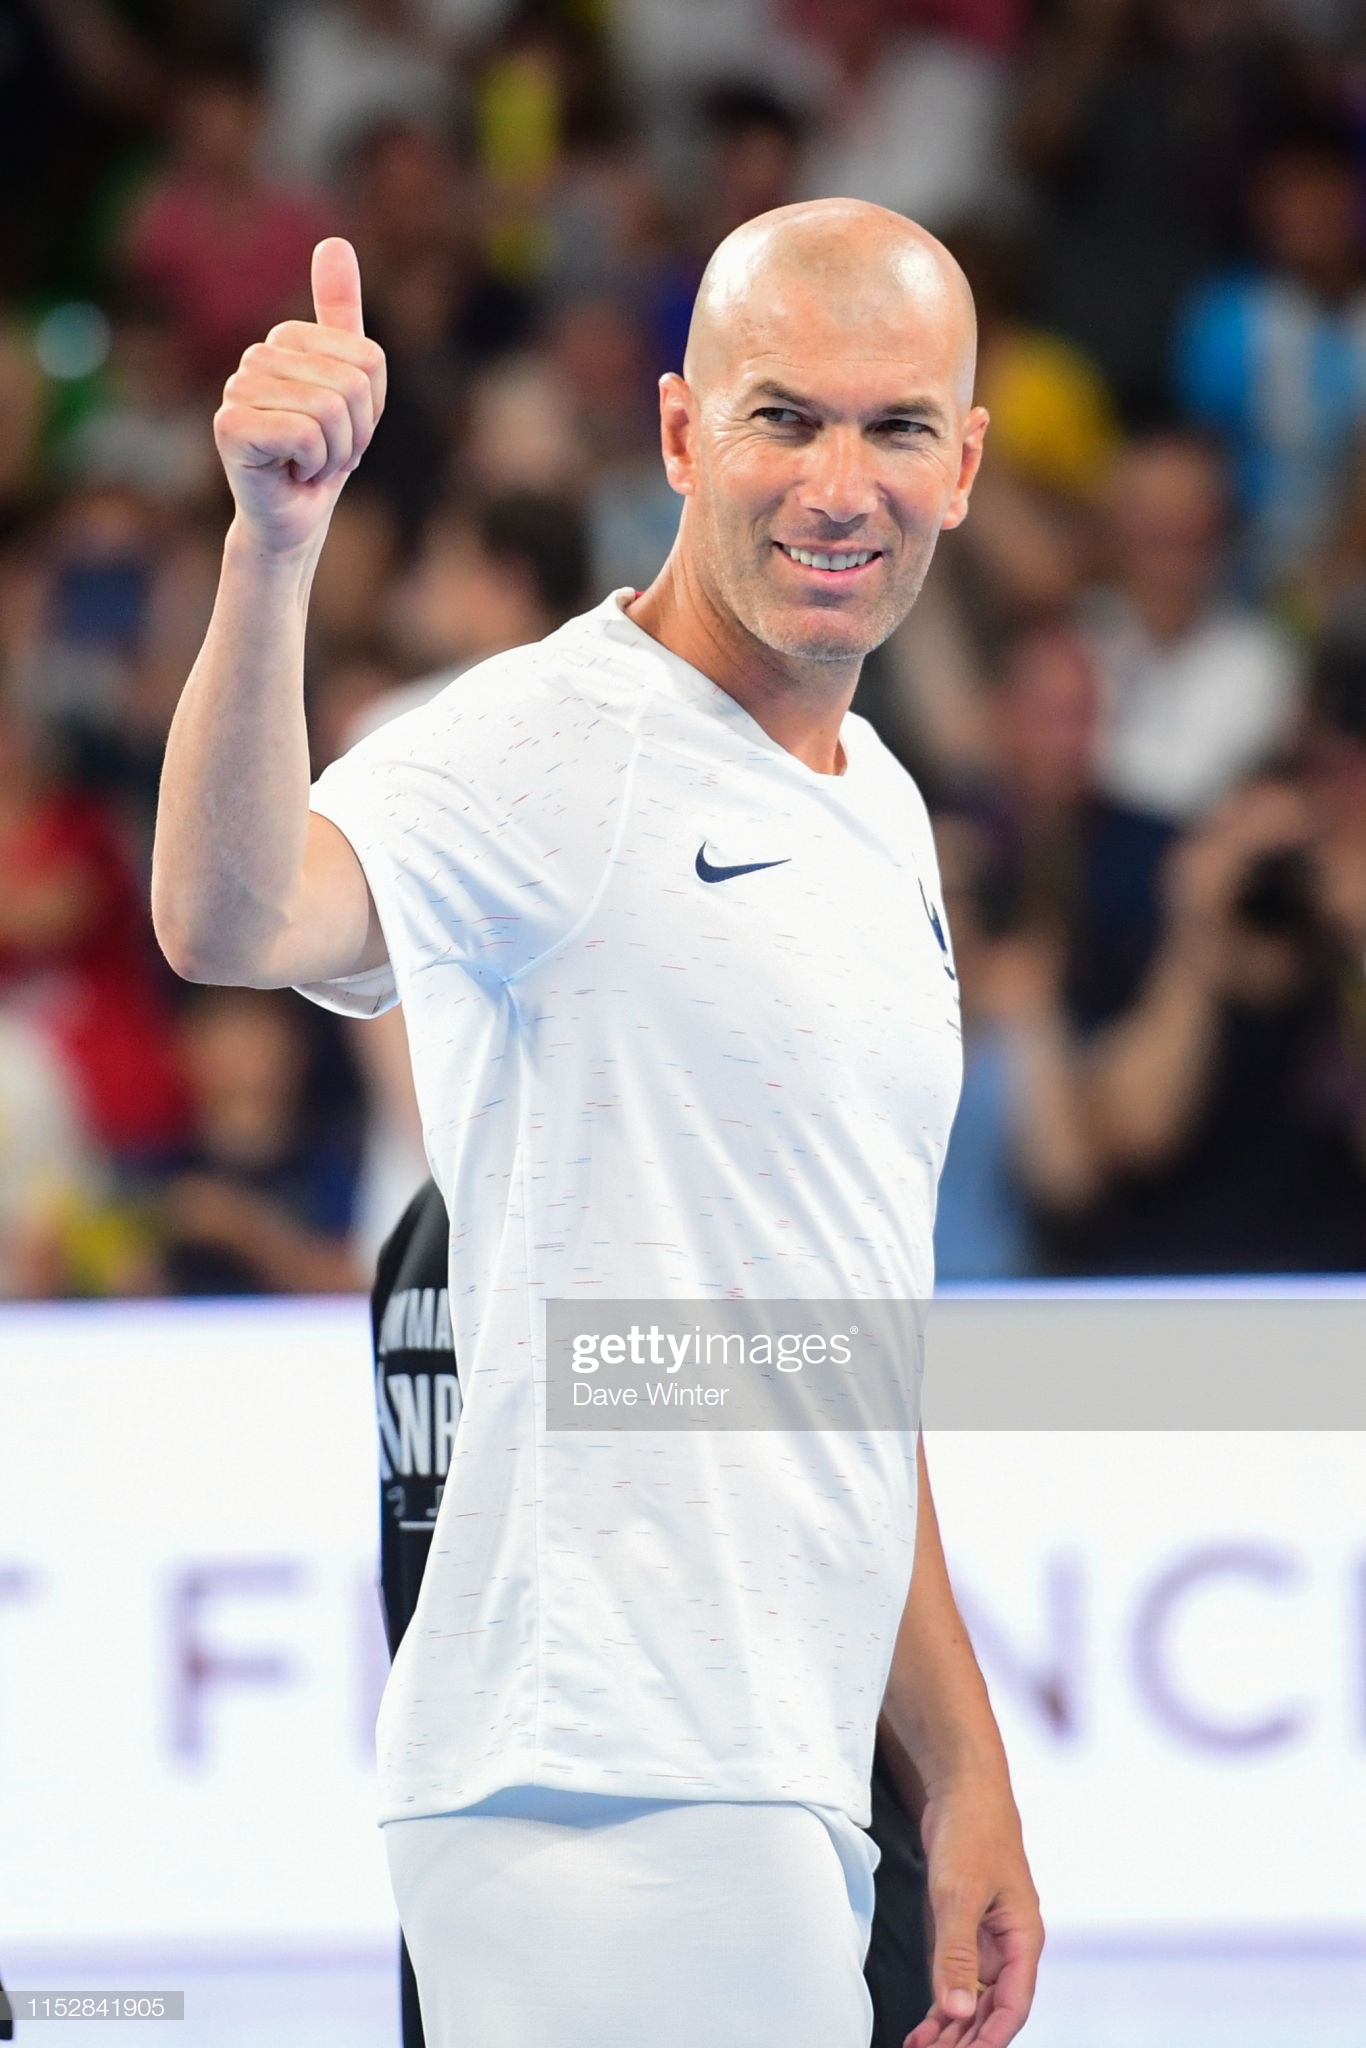 gettyimages-1152841905-2048x2048.jpg